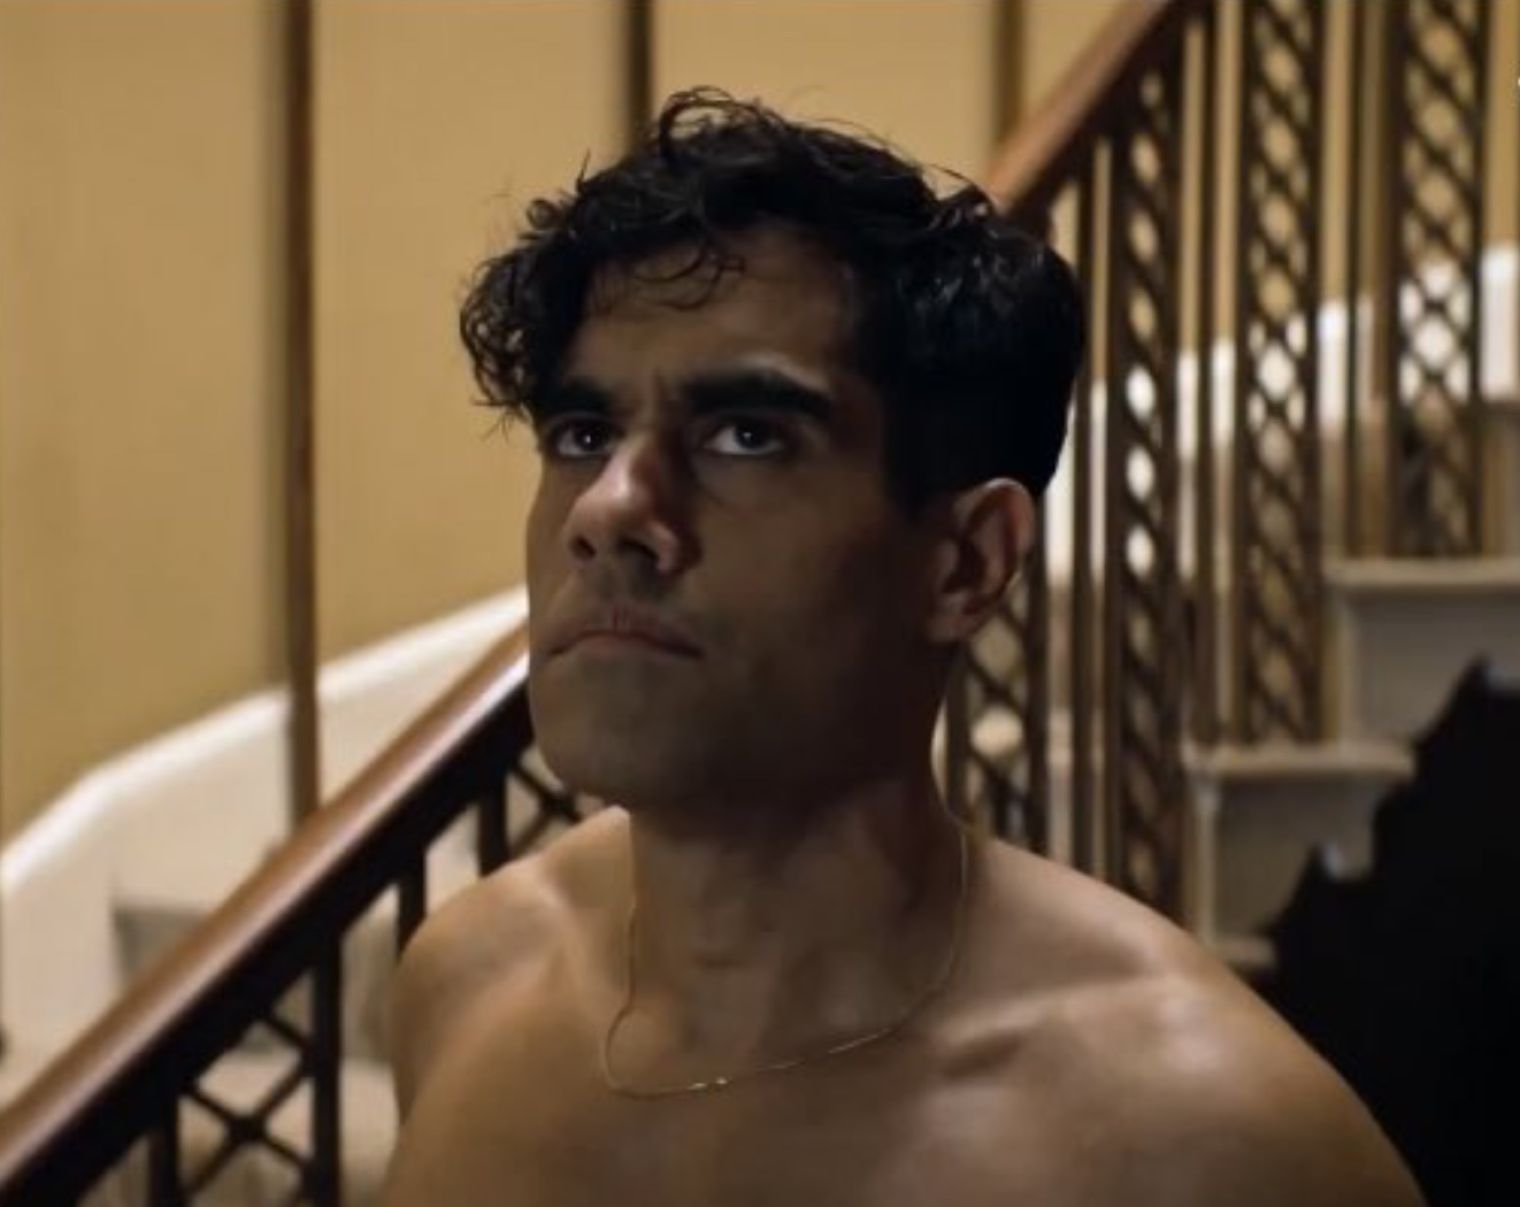 The trailer has just been released for the BBC's terrifying new crime drama 'Wolf', starring Sacha Dhawan as DI Honey